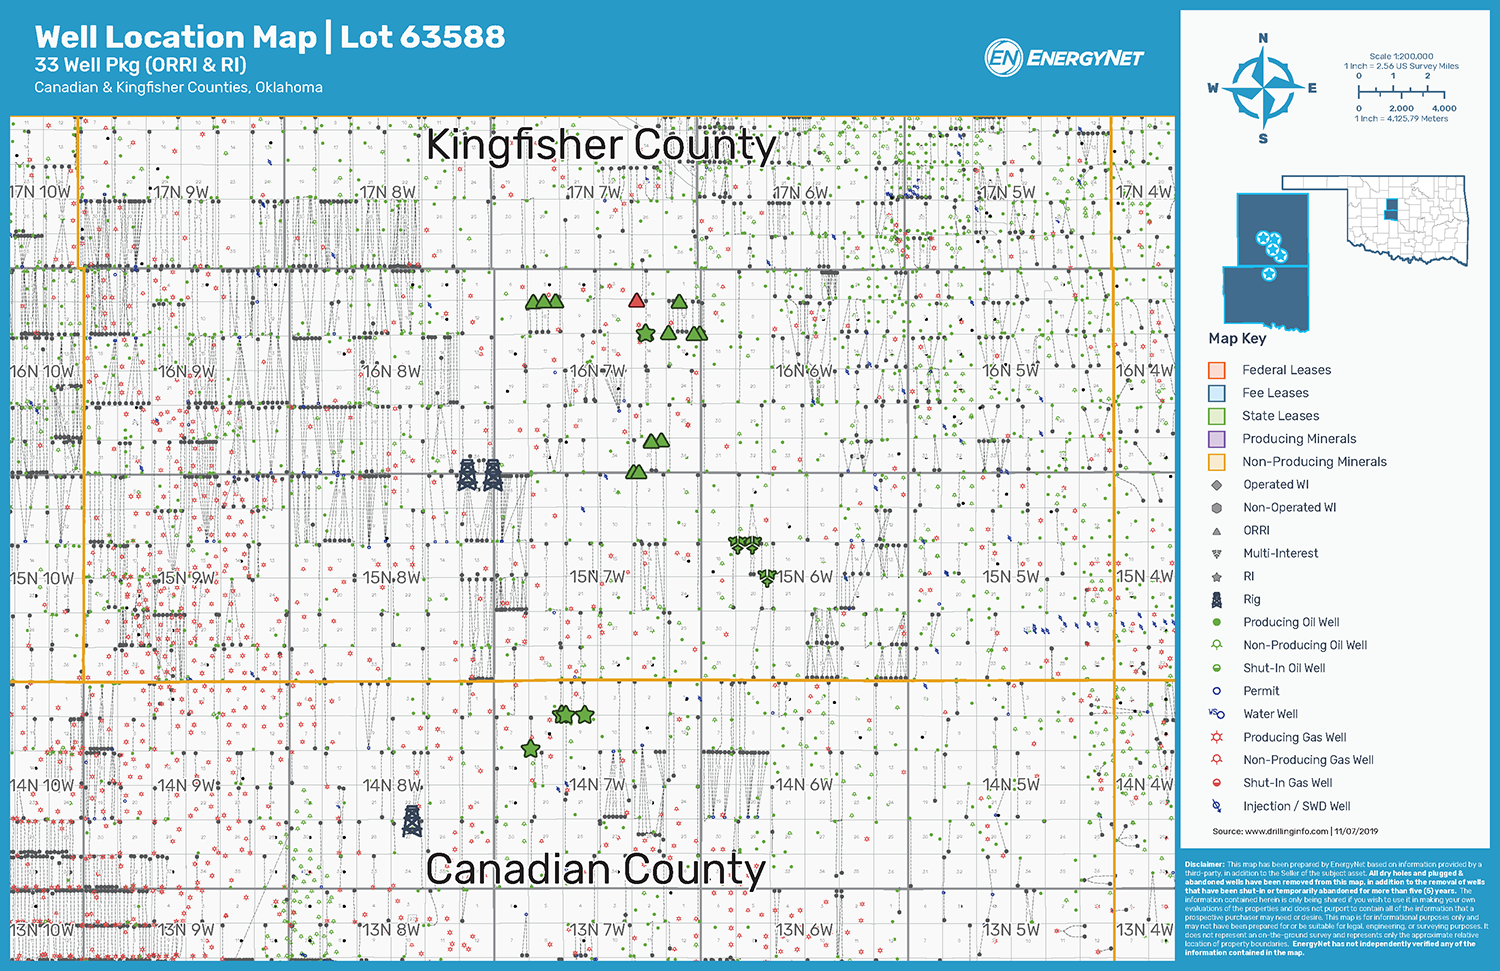 Boomer Minerals Oklahoma Royalty Package Asset Map,  Canadian and Kingfisher Counties (Source: EnergyNet)